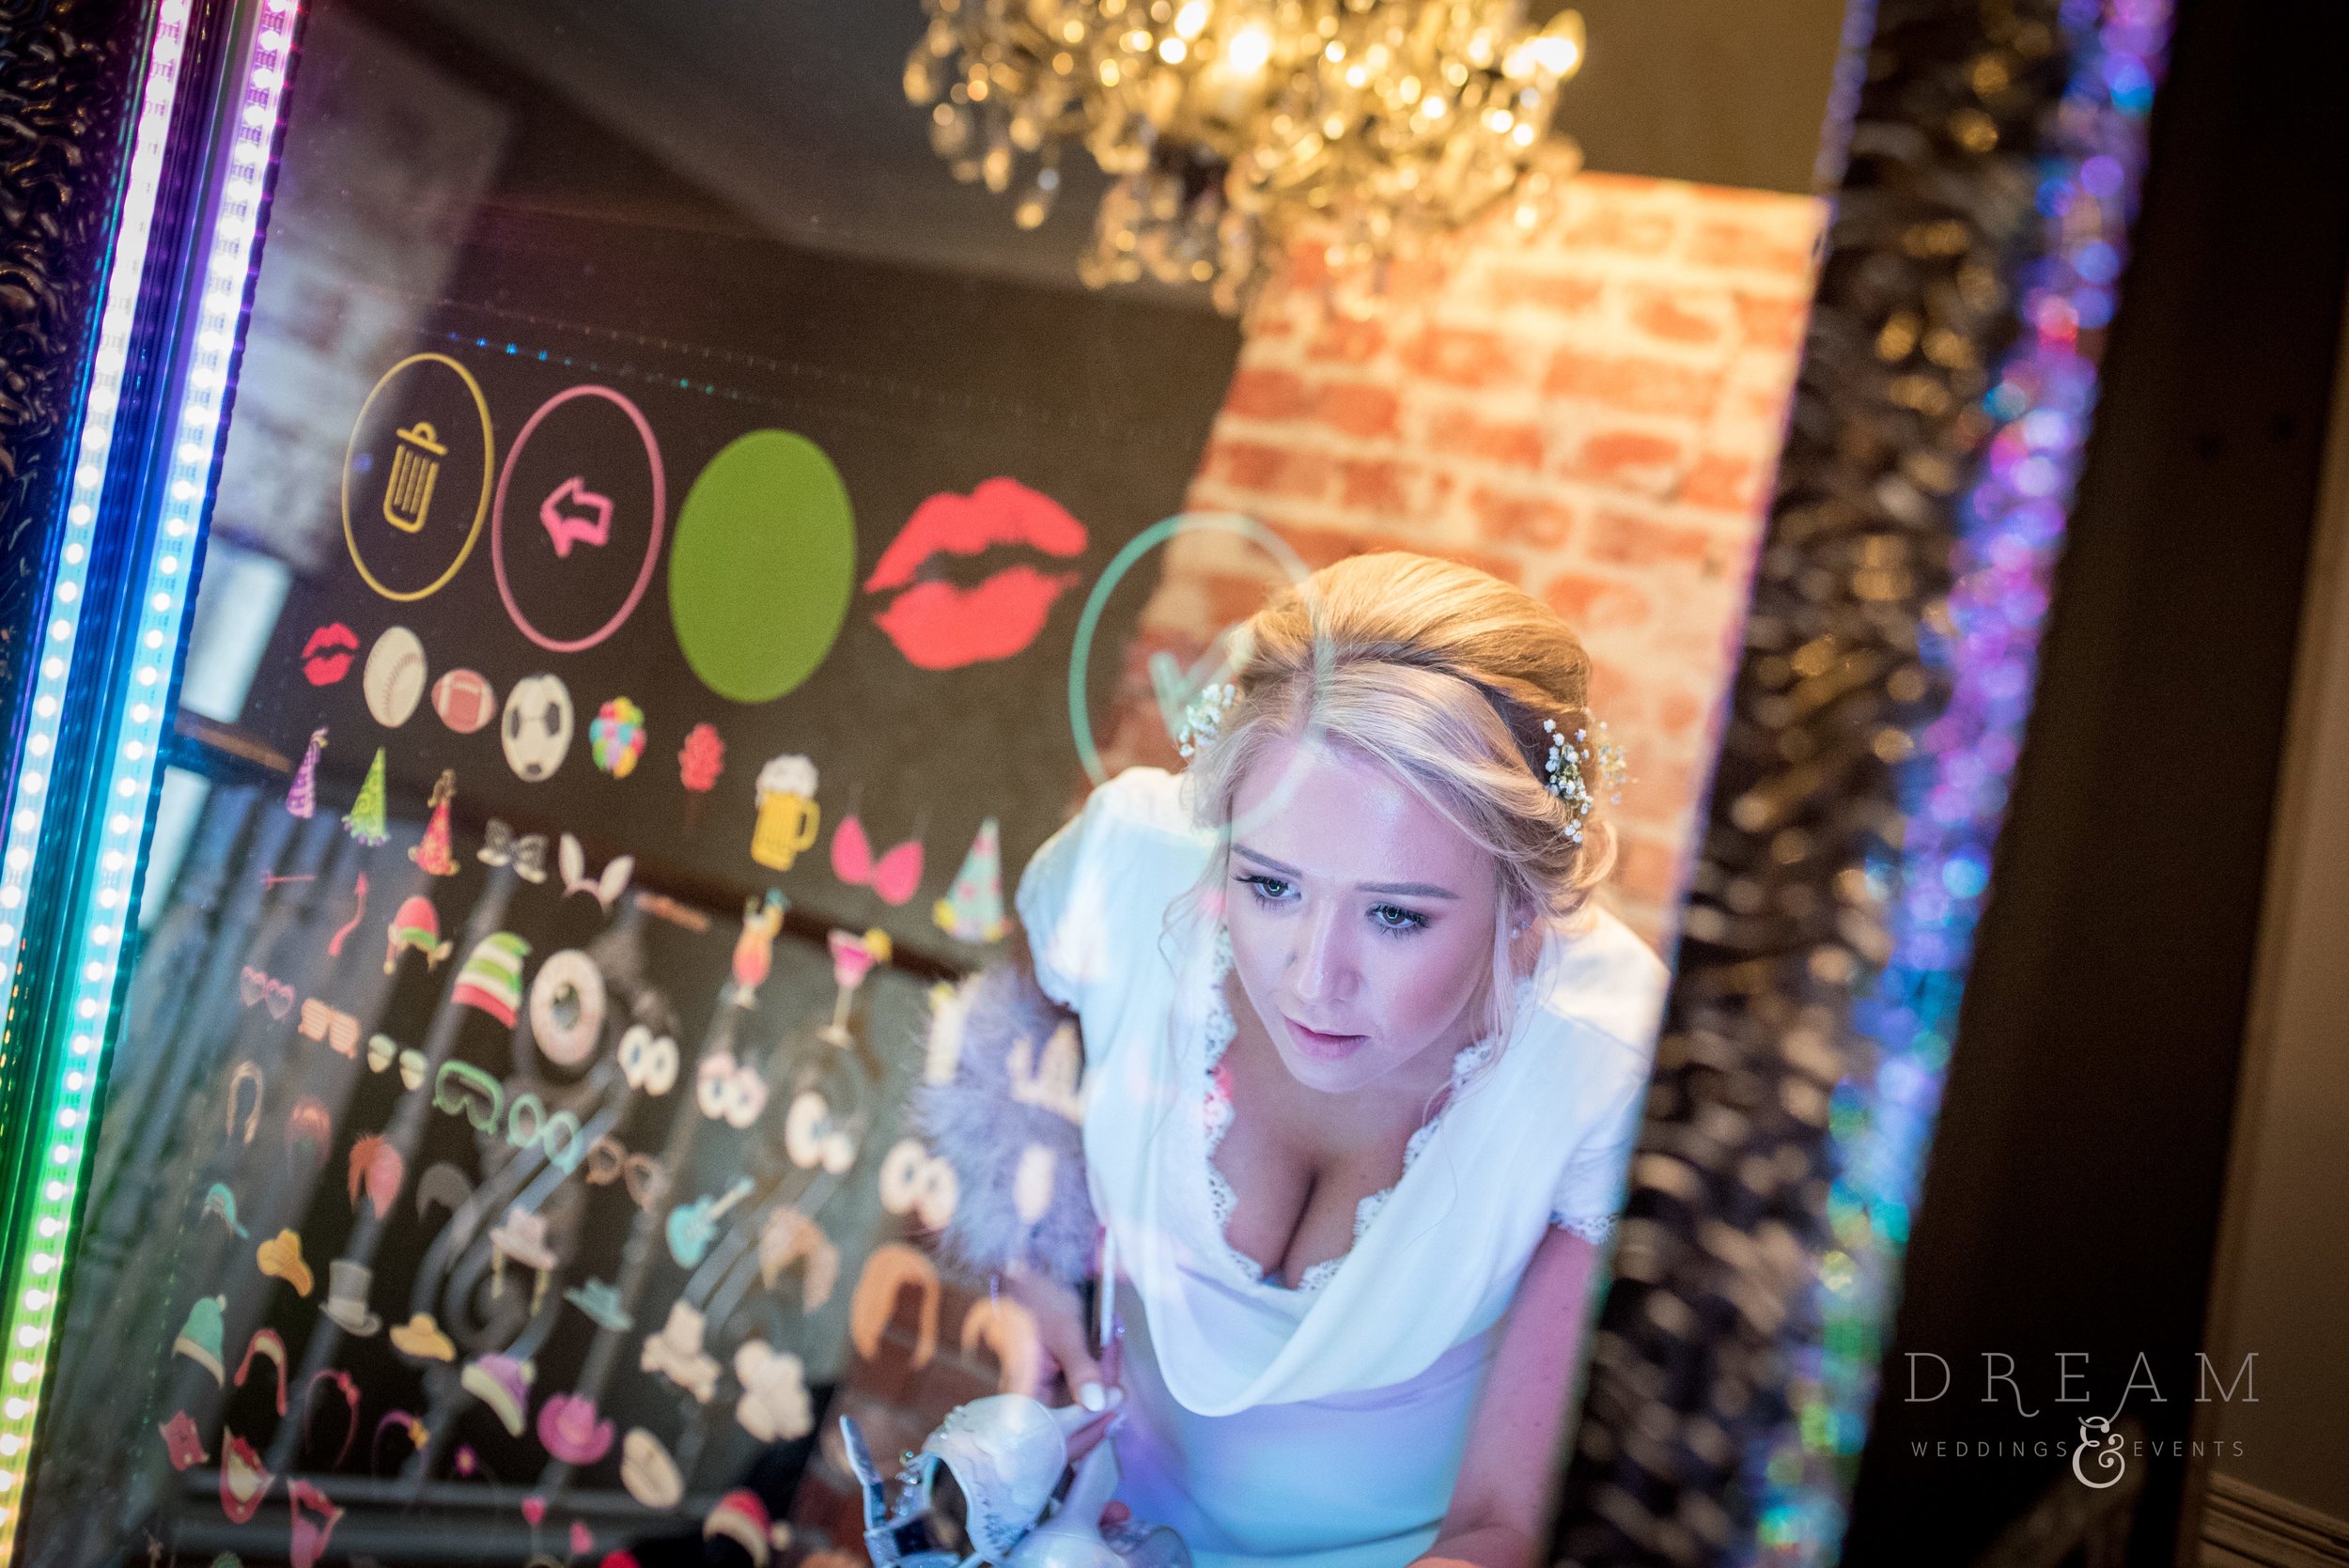 Magic Selfie Mirror Photo Booth Hire Nottingham, Derby, Leicester, East Midlands.